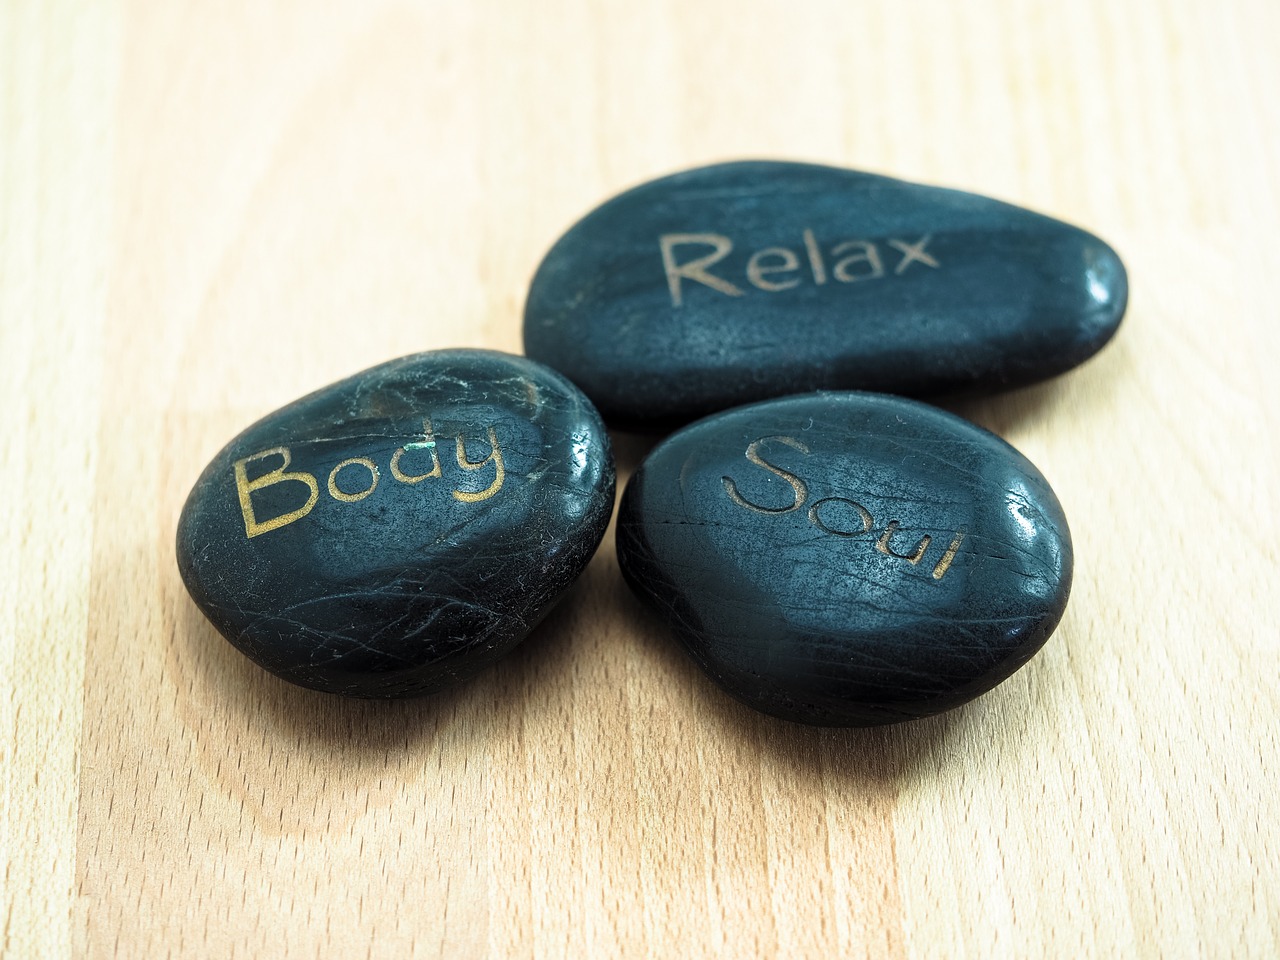 Three Vishuddha stones placed on a table with the words relax, soul, and body written on them.